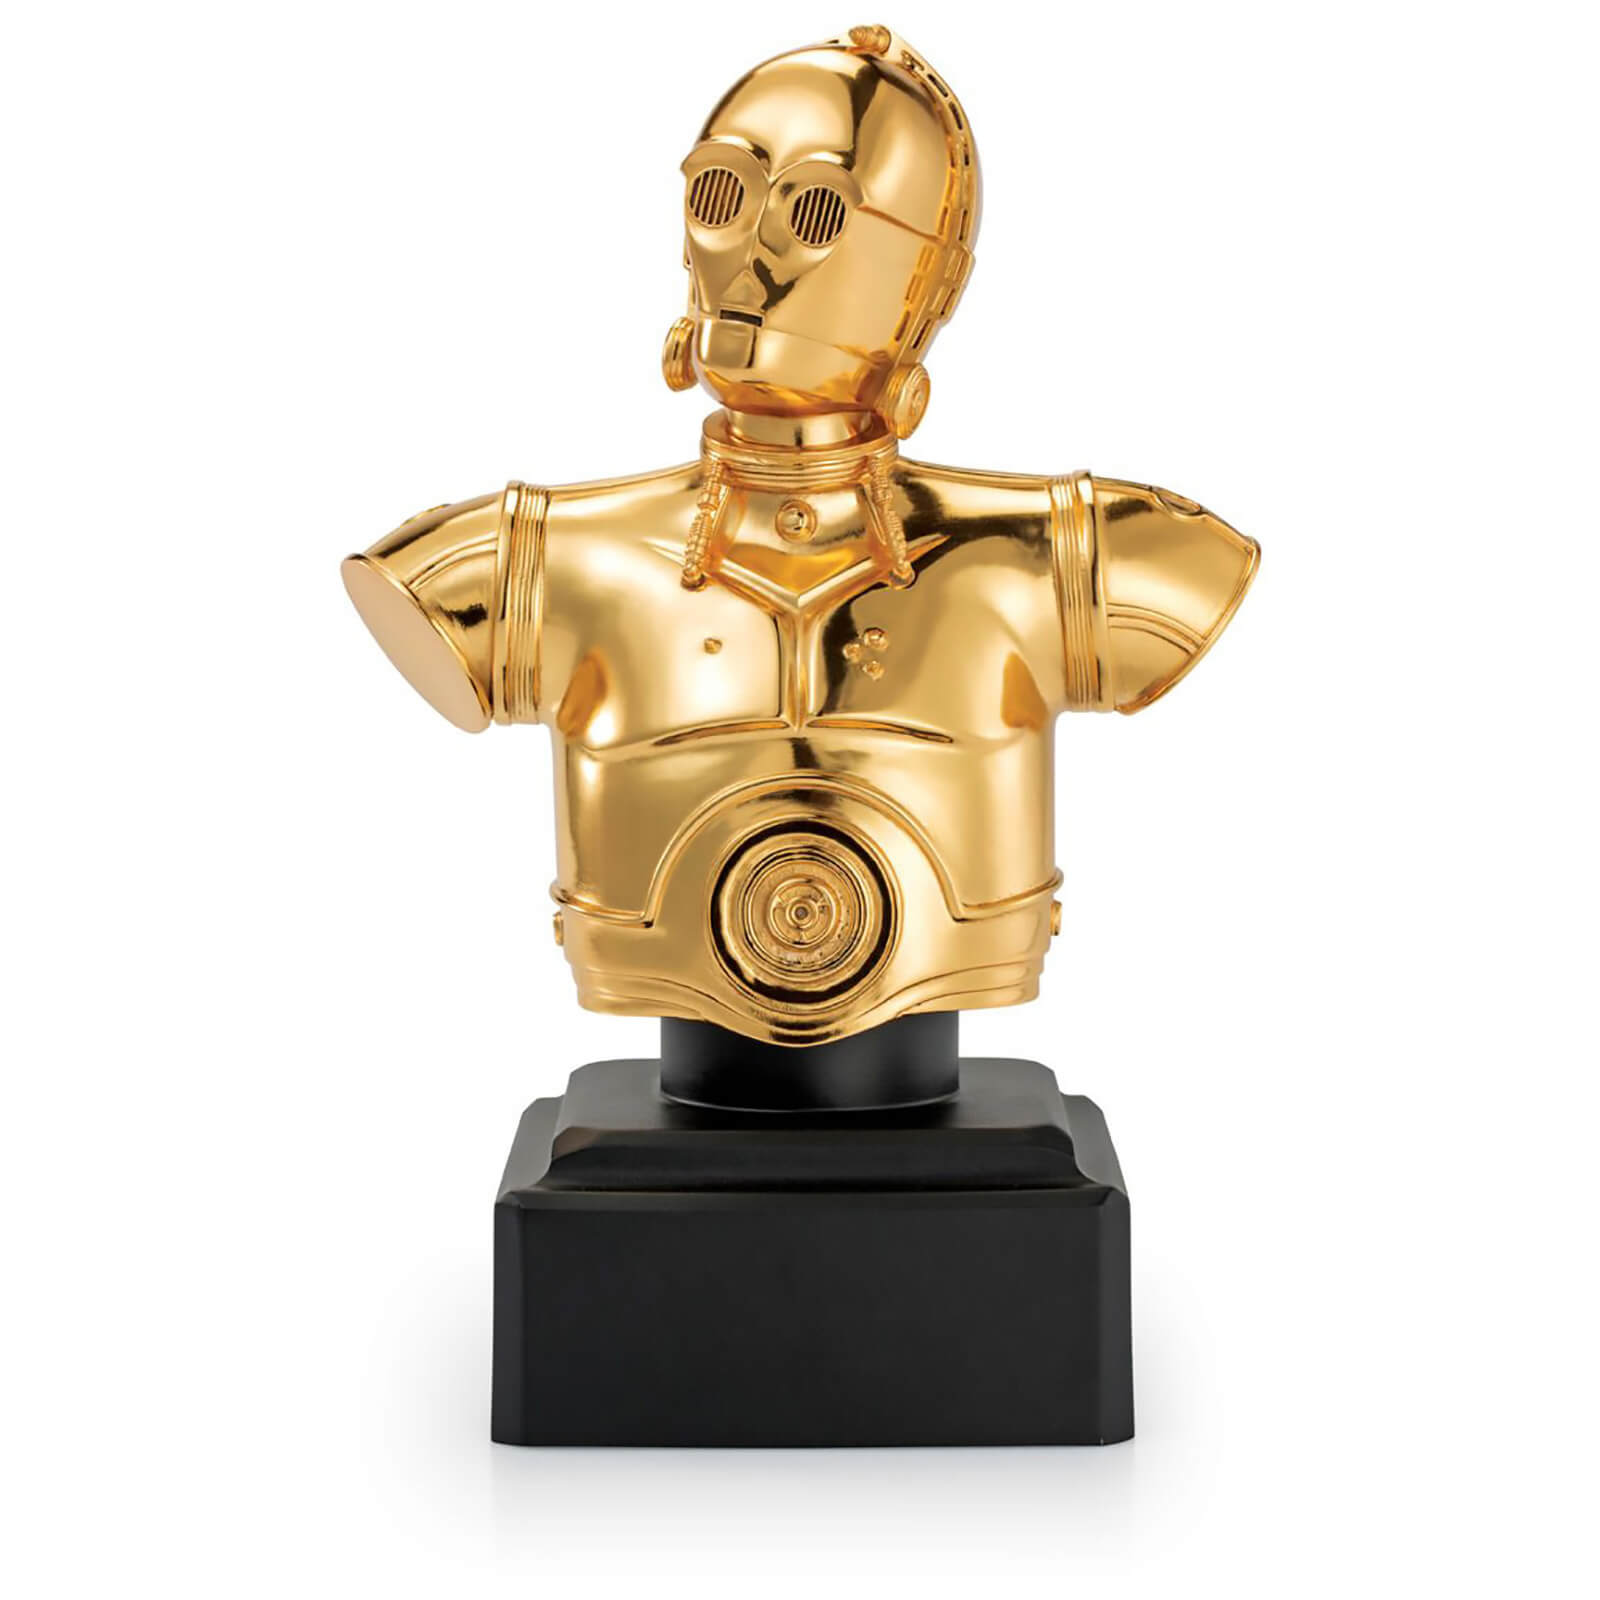 Image of Royal Selangor Star Wars Limited Edition C-3PO Bust